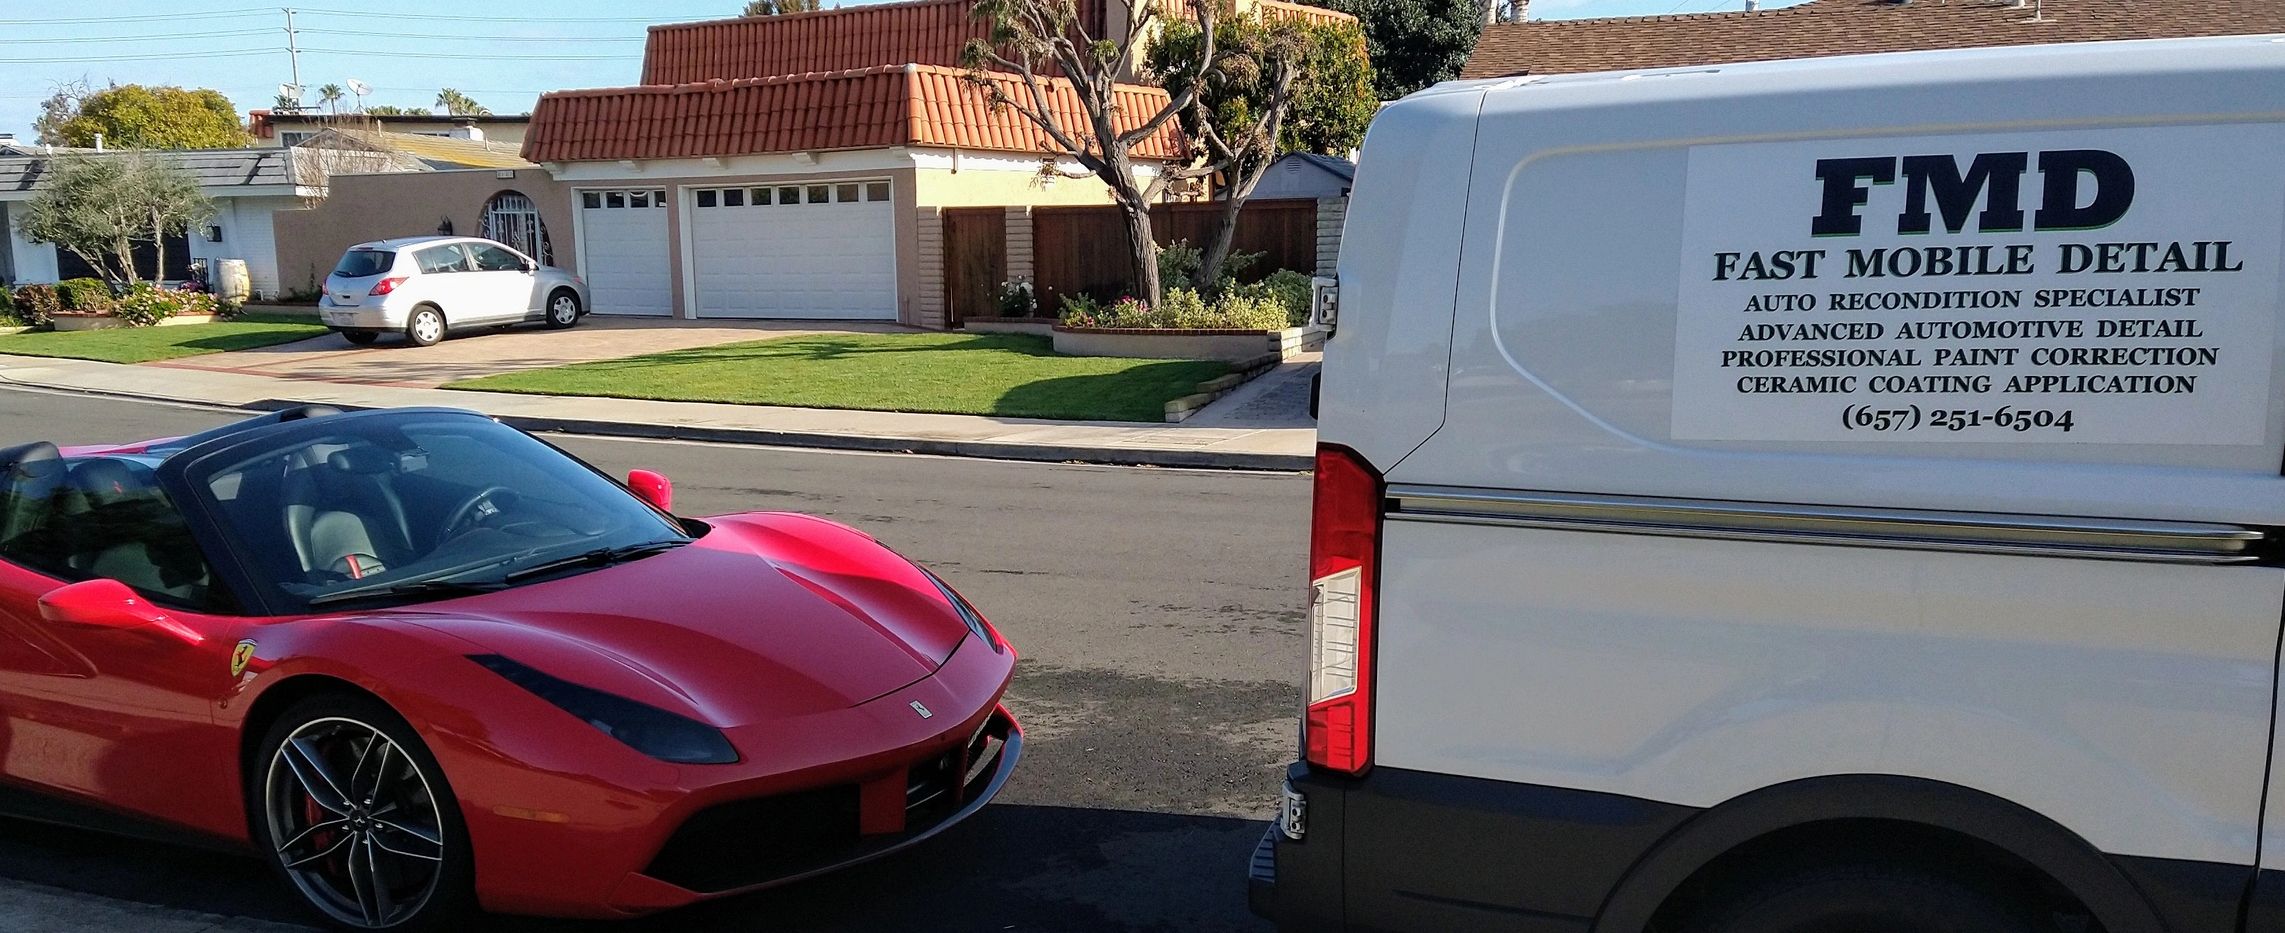 The mobile detail van parked in front of a Ferrari after completing an R1 coating application.